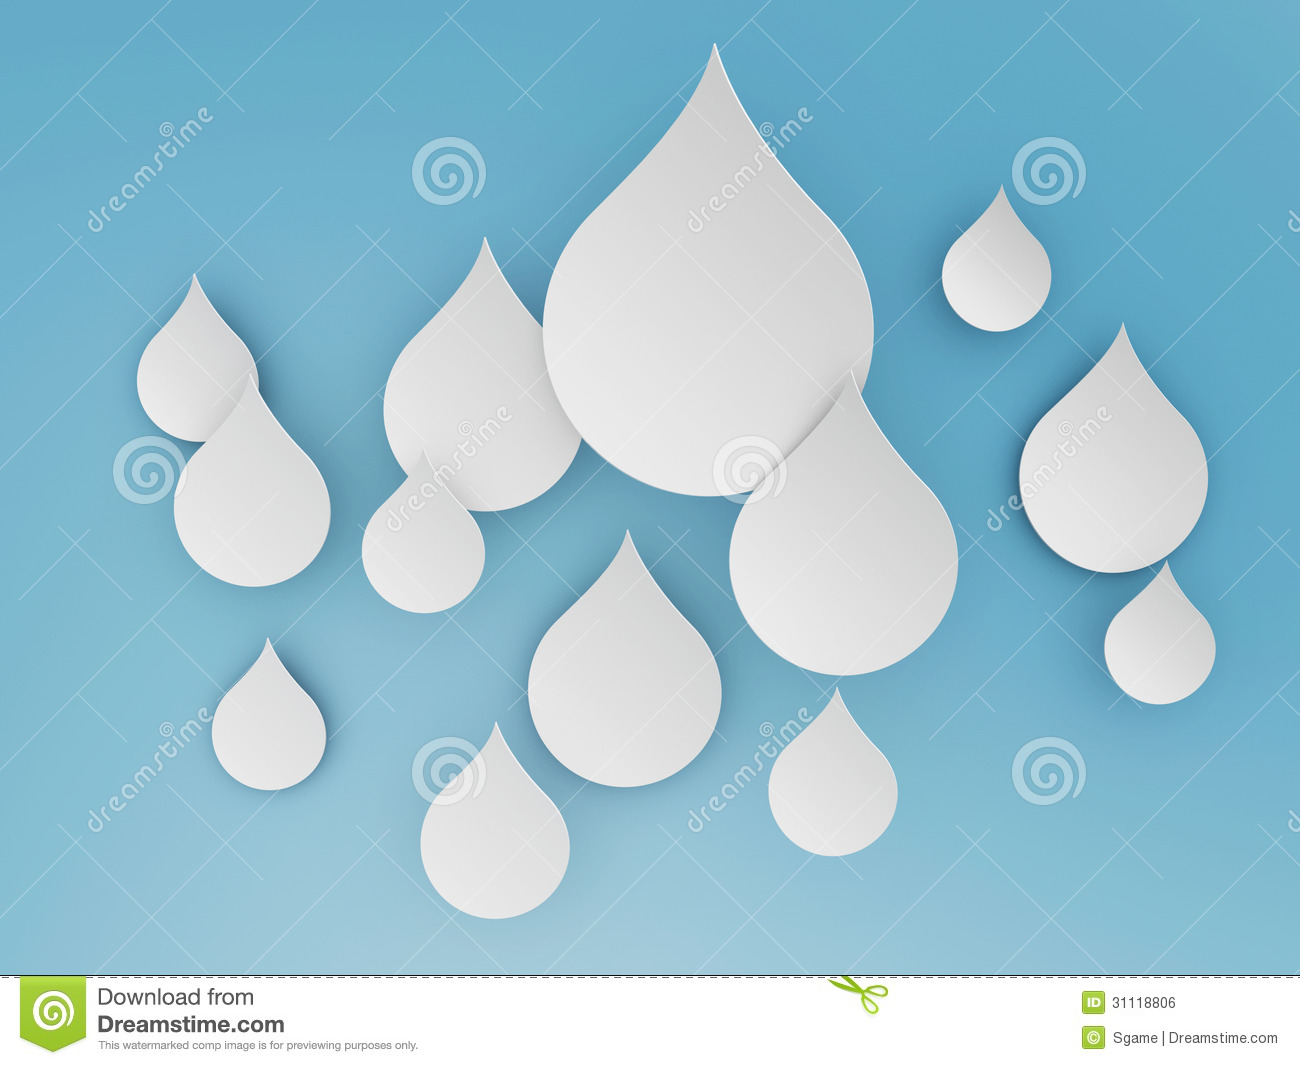 Blue Sky with Water Drops Background